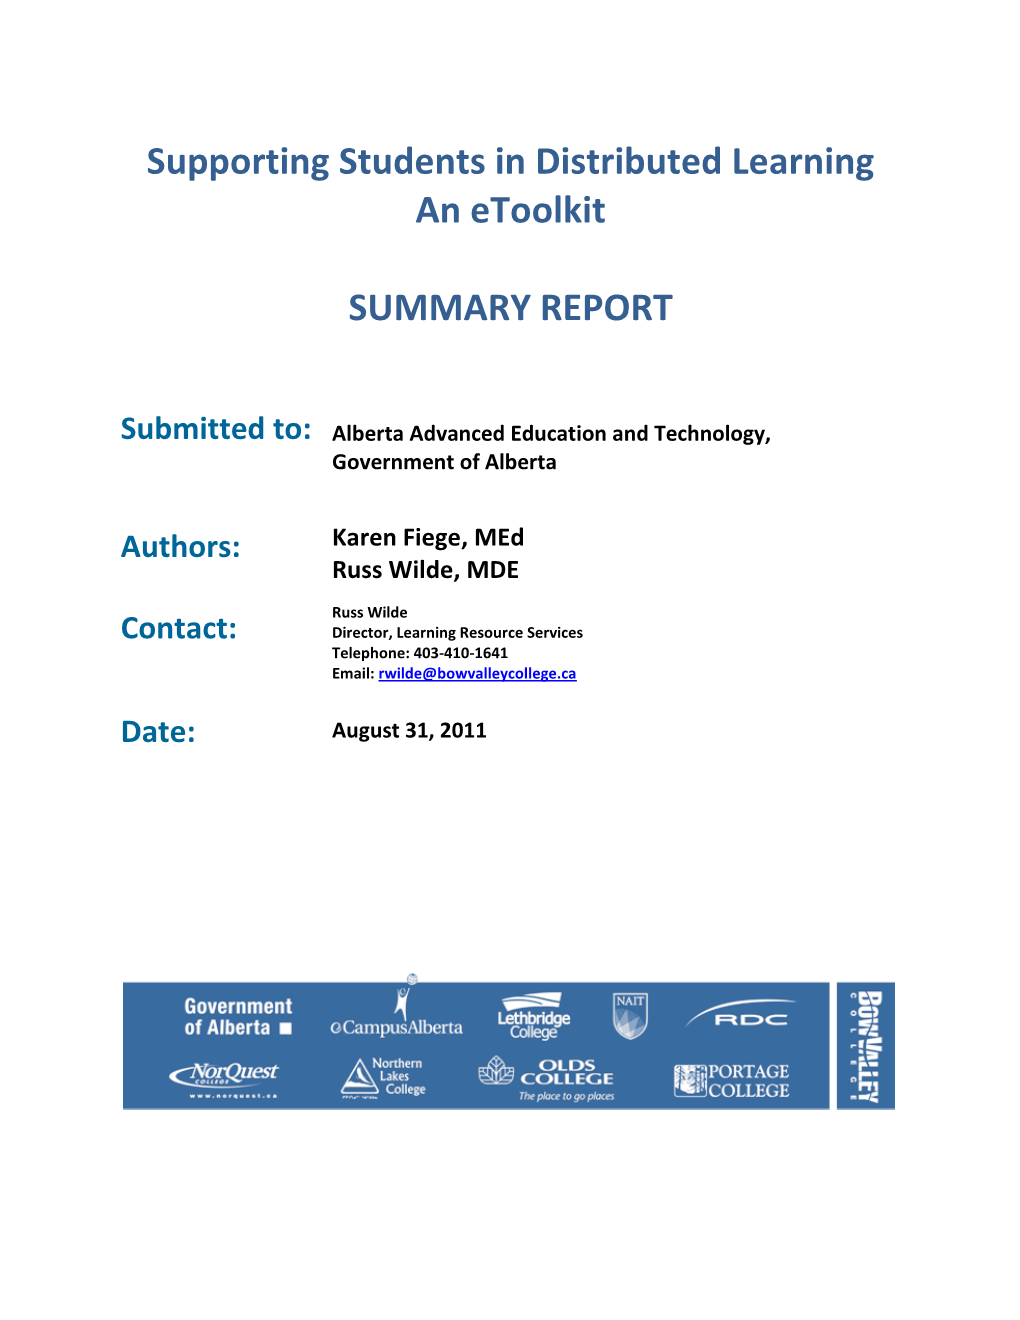 Supporting Students in Distributed Learning an Etoolkit